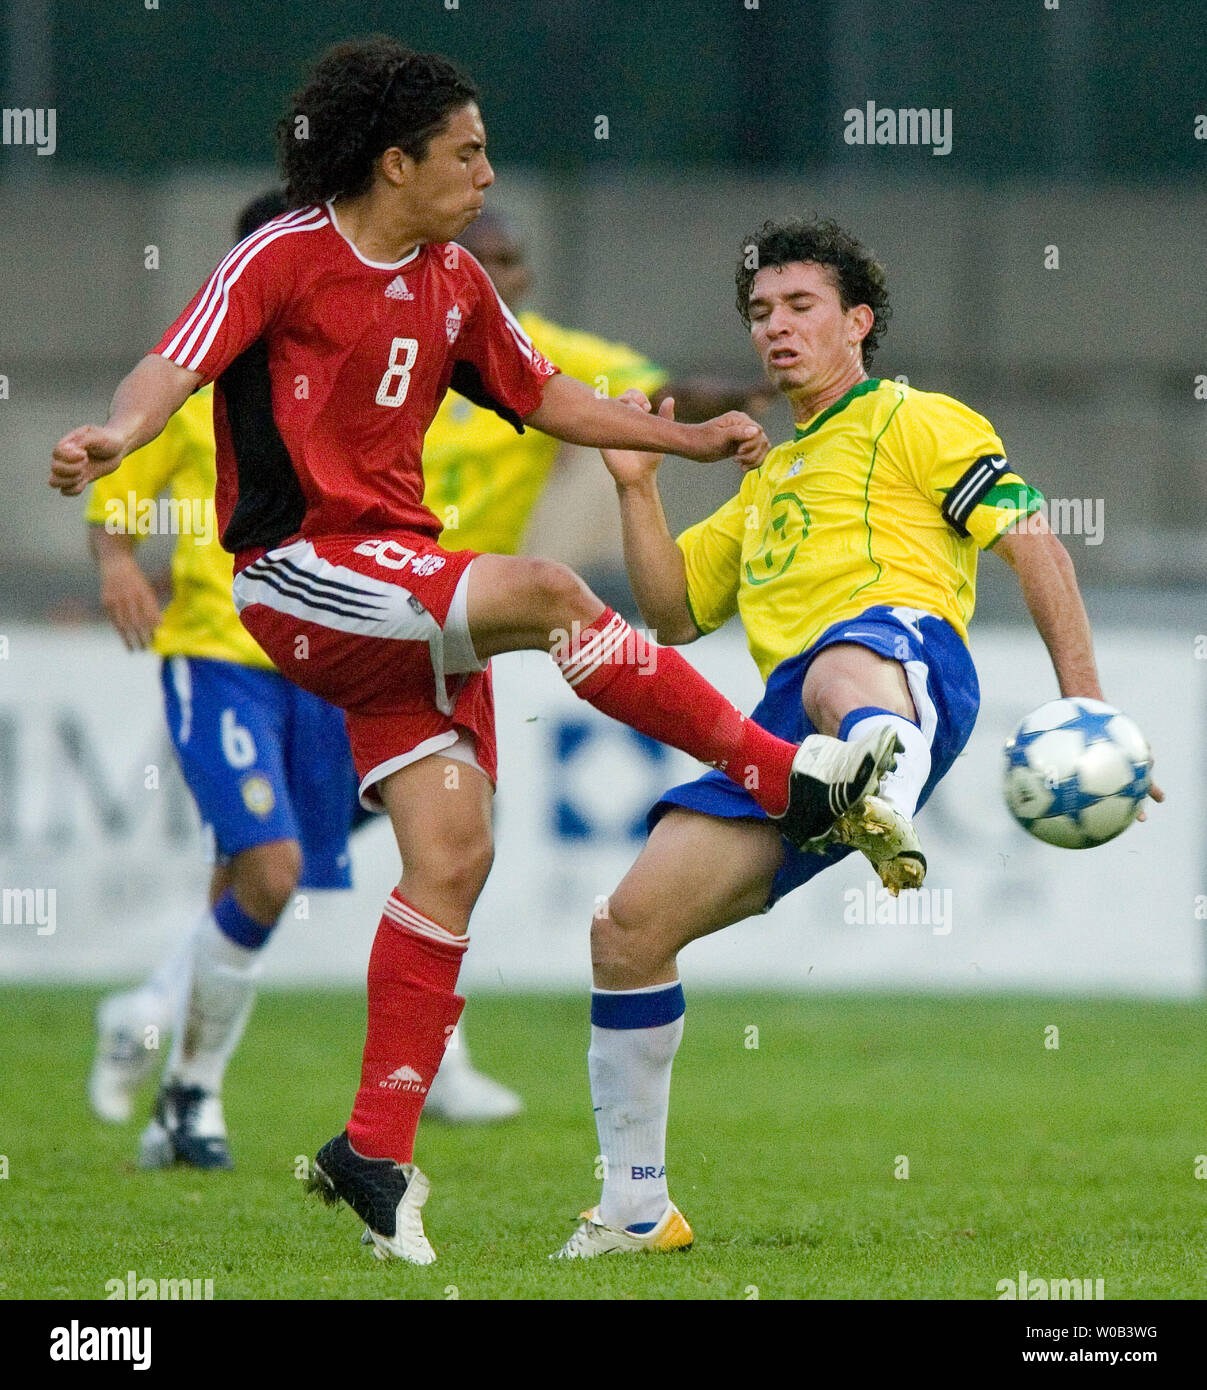 Canada's Cristian Nunez (L) and Ji Parana of Brazil go for the ball in the second half in a men's U20 soccer game at Vancouver's Swangard Stadium, May 25, 2006. Brazil wins 3-1. (UPI Photo/Heinz Ruckemann) Stock Photo